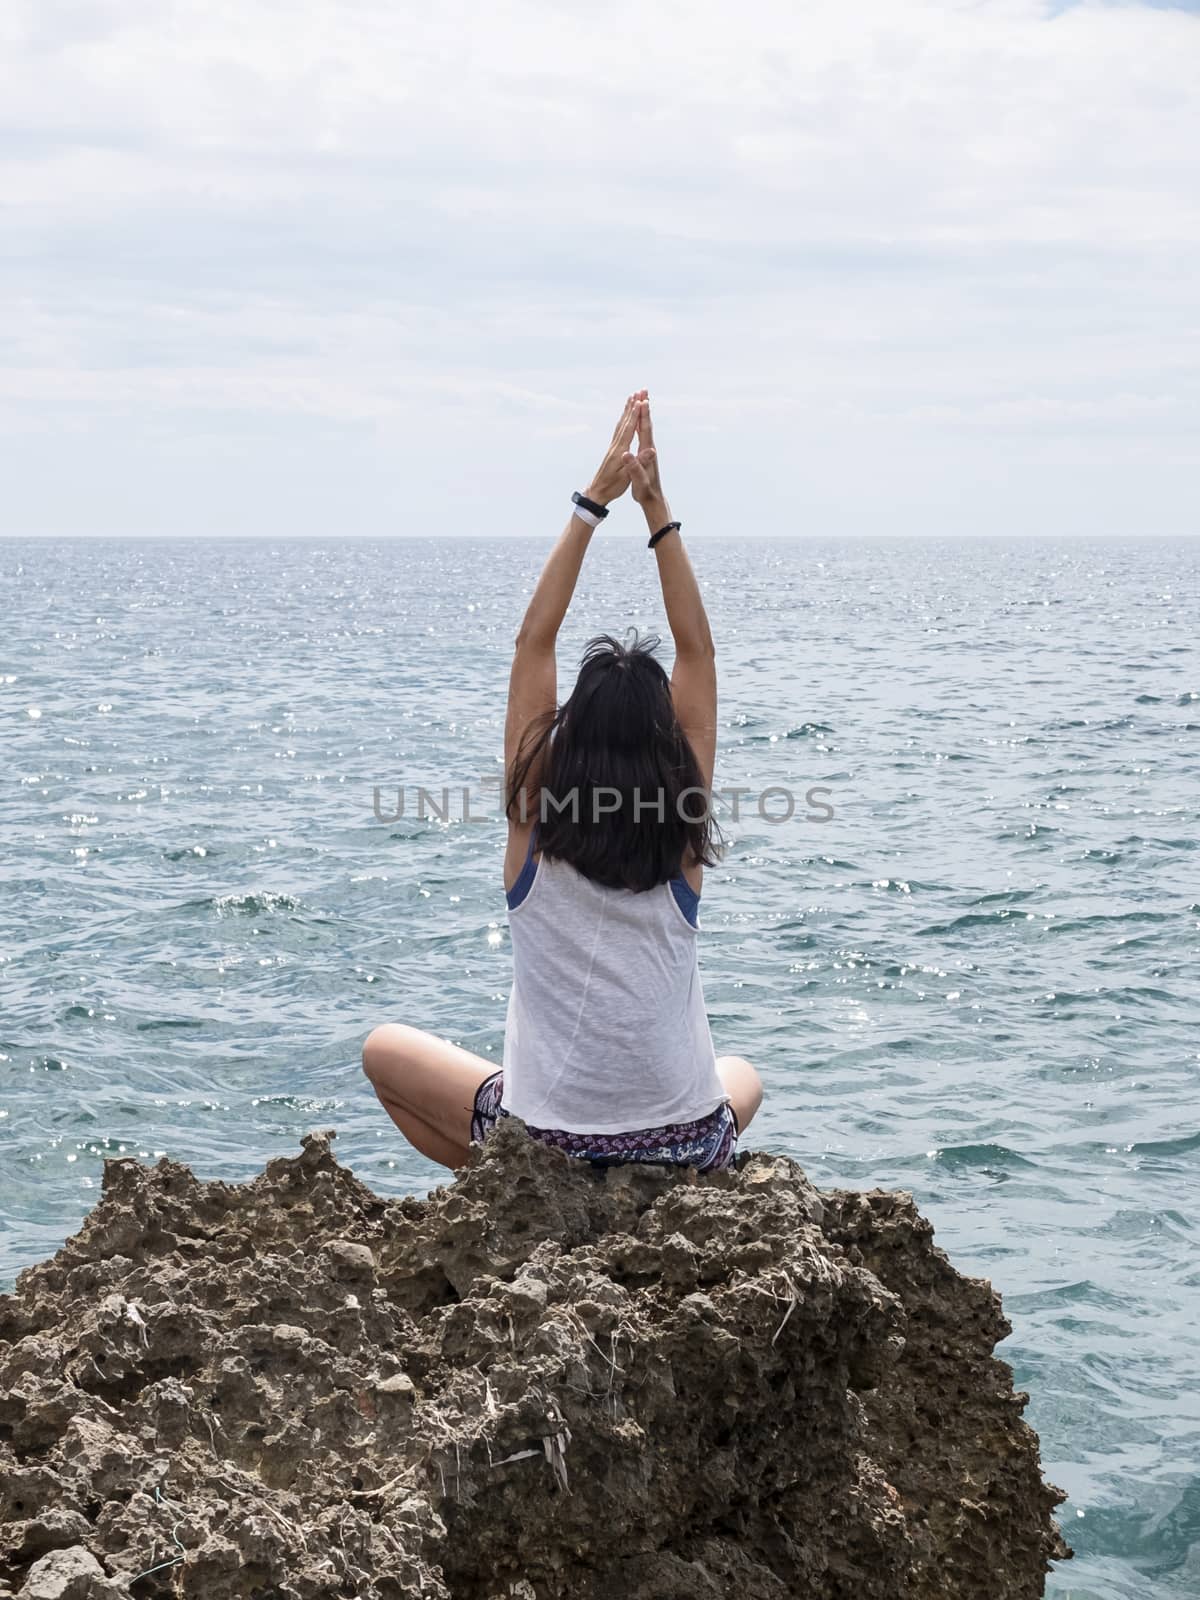 Rear view of young woman with long hair practicing yoga on rocks at sea by raferto1973